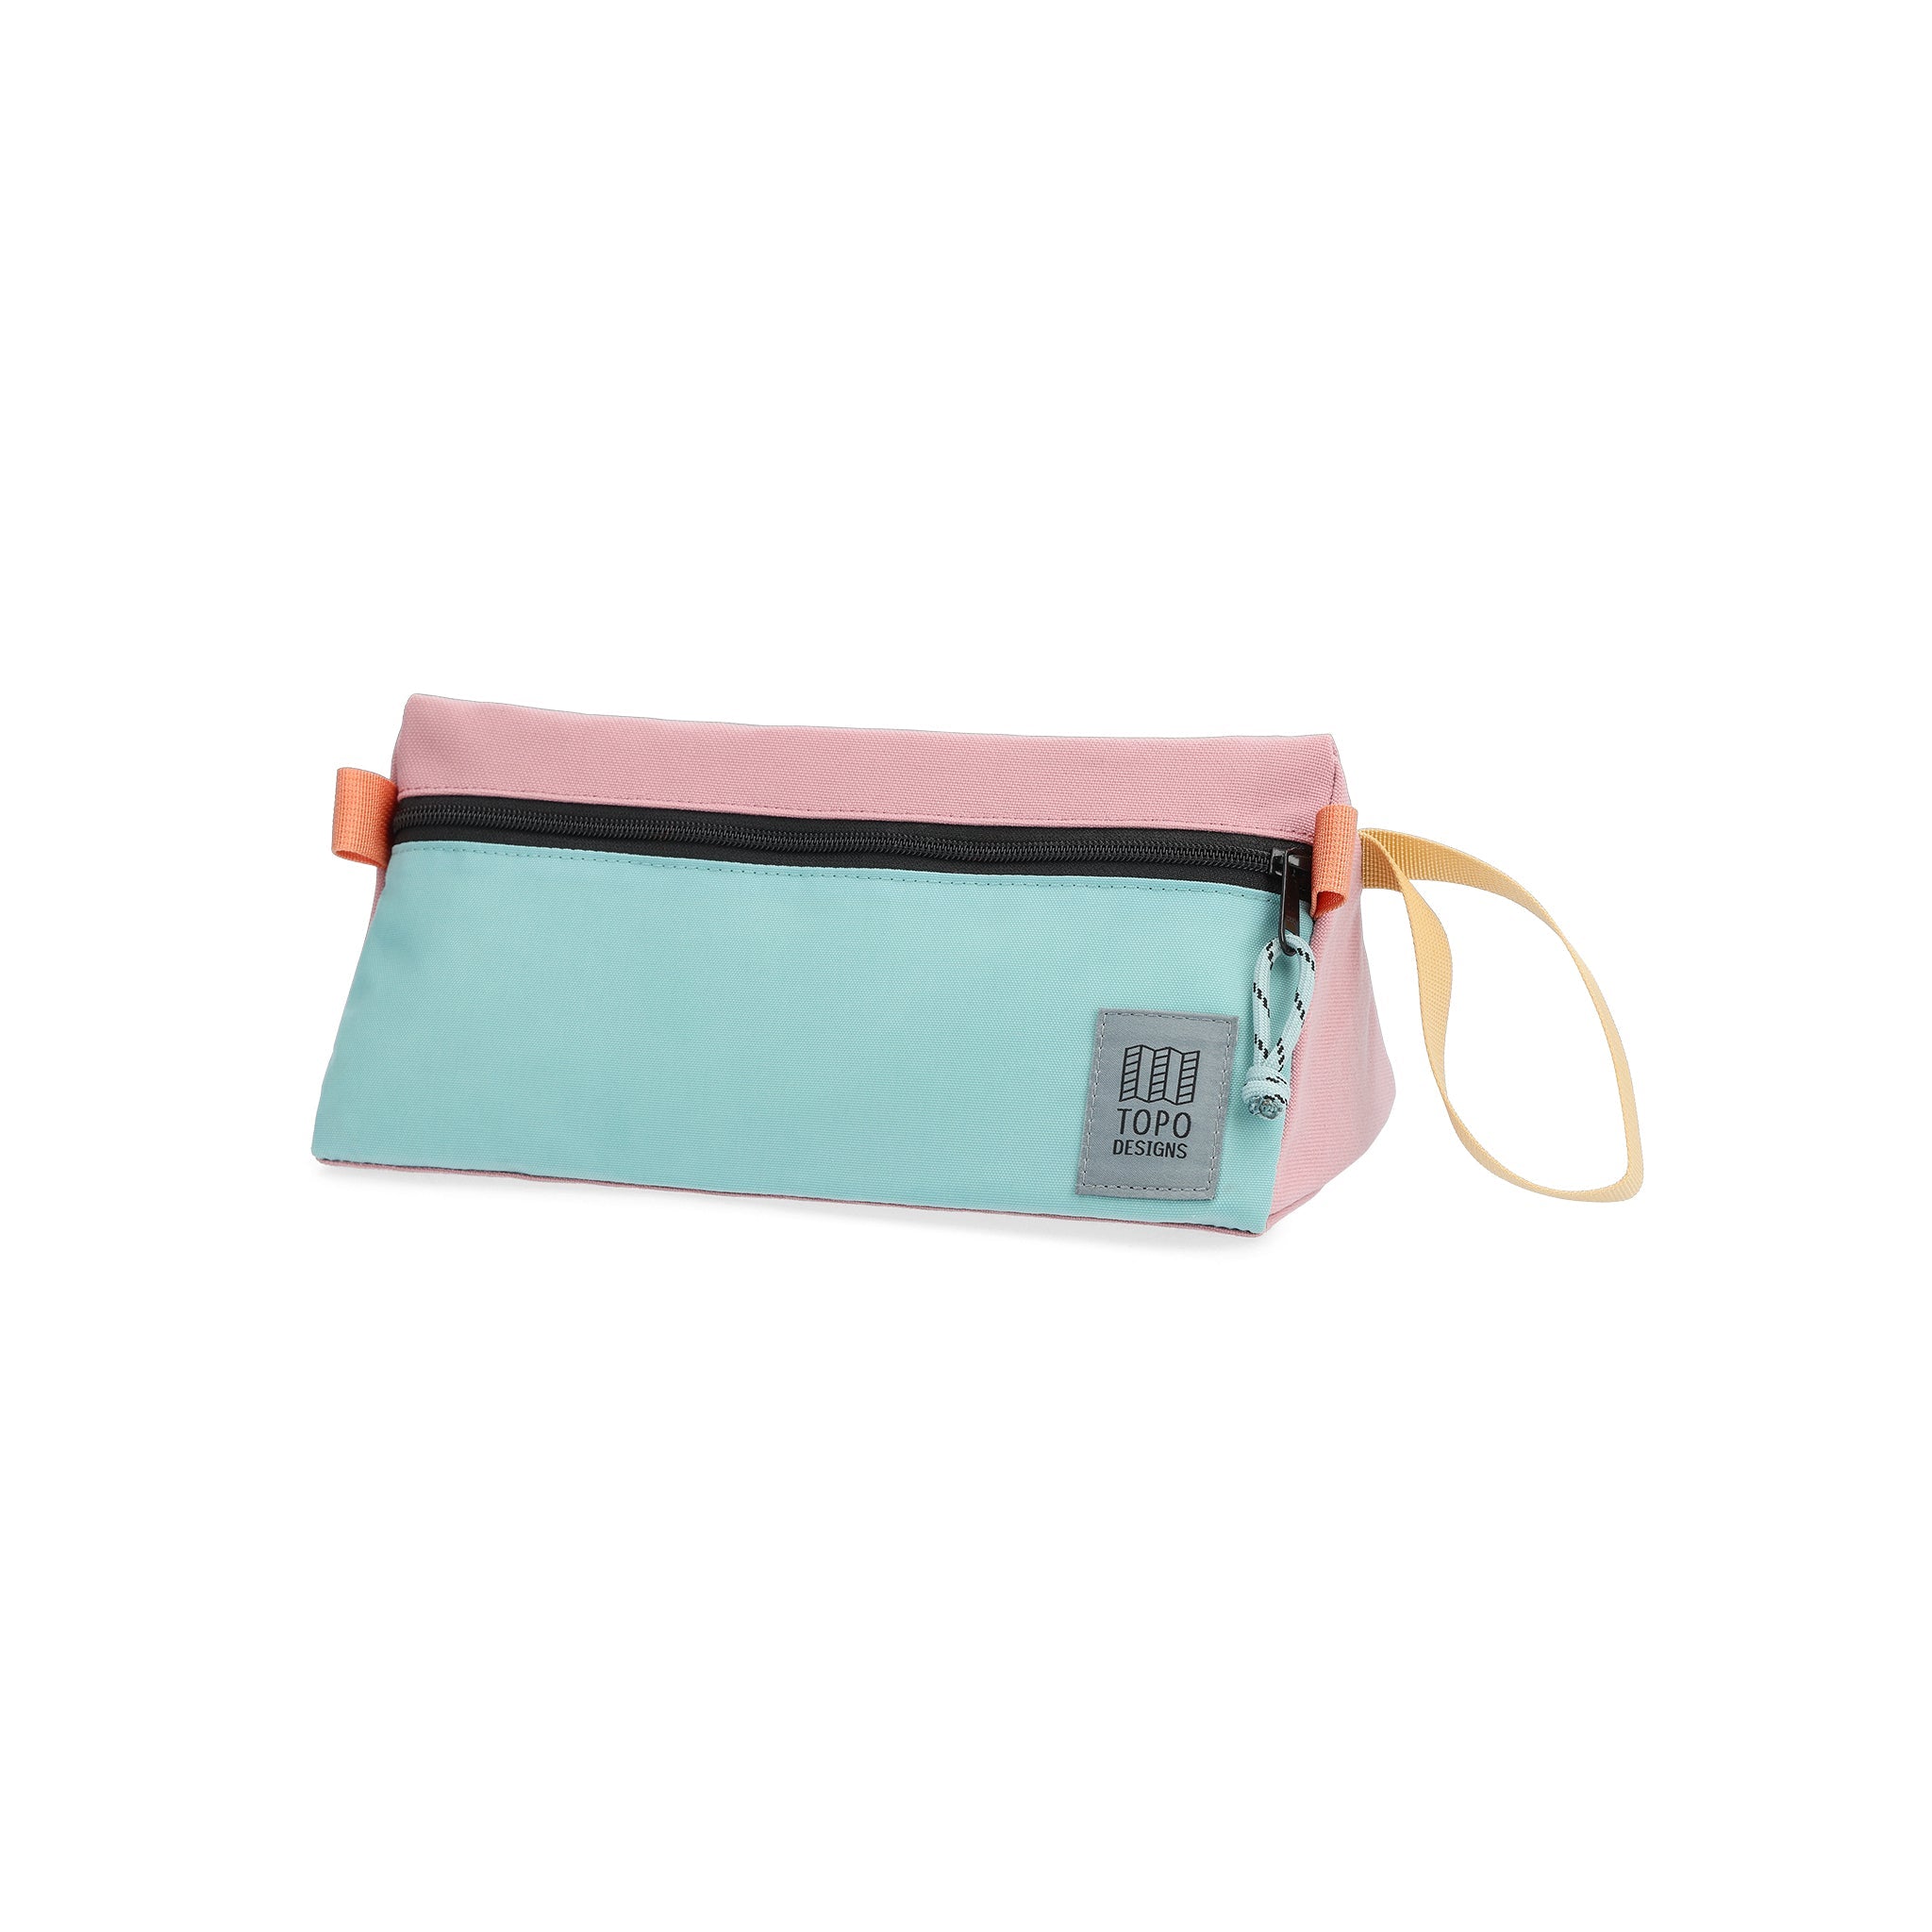 Front View of Topo Designs Dopp Kit in "Rose / Geode Green"